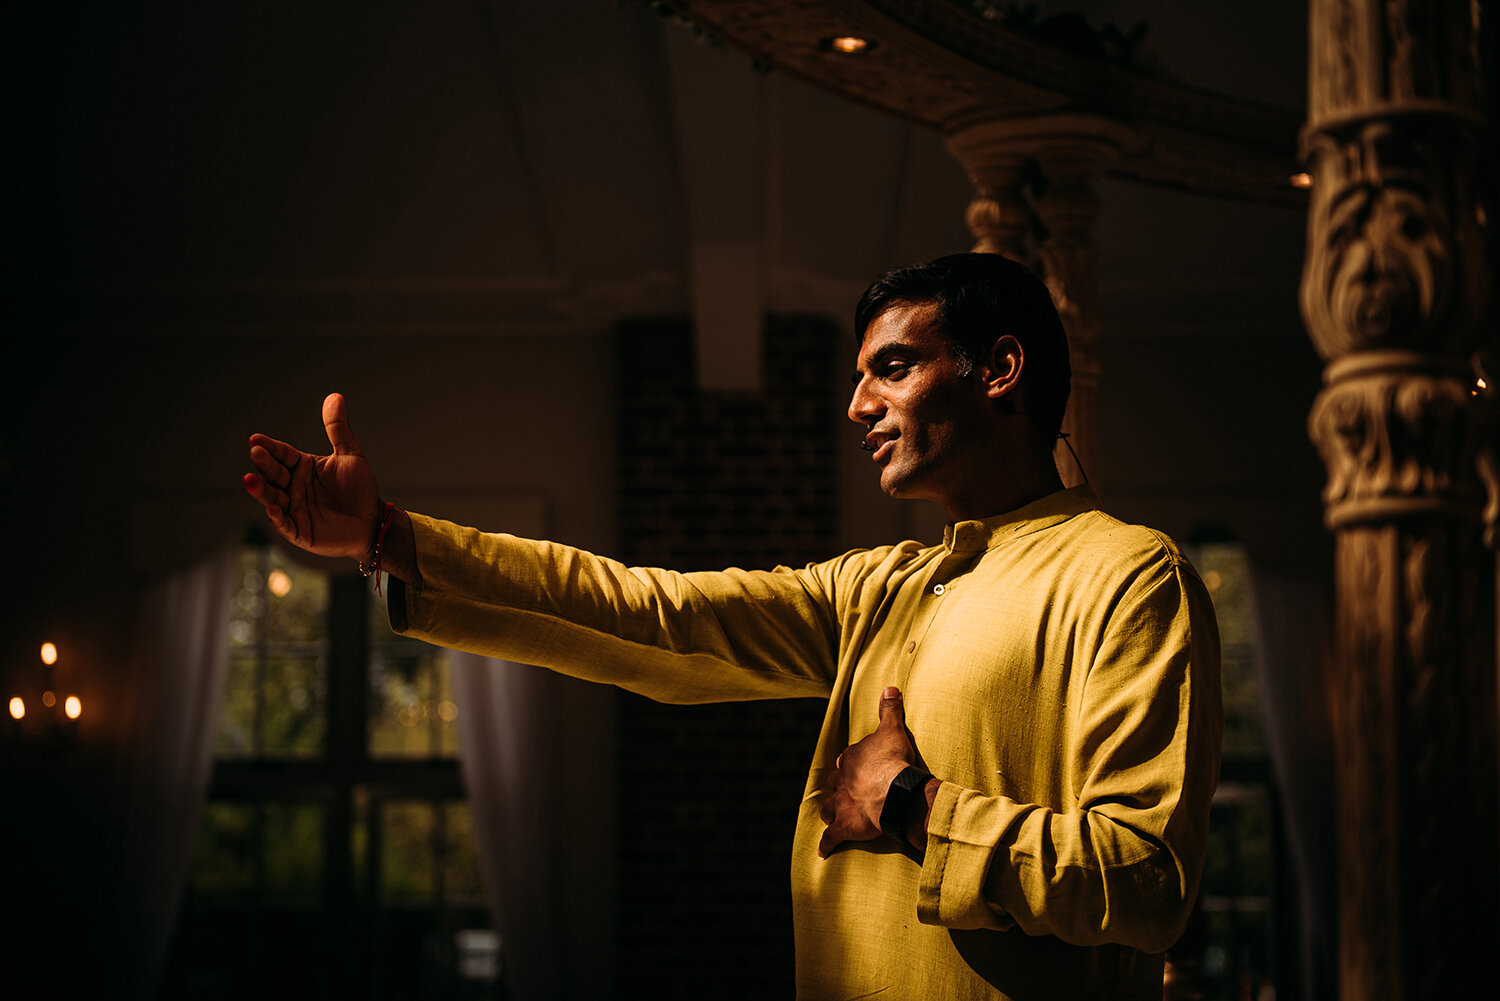  great light on the Indian priest as he raises an arm 